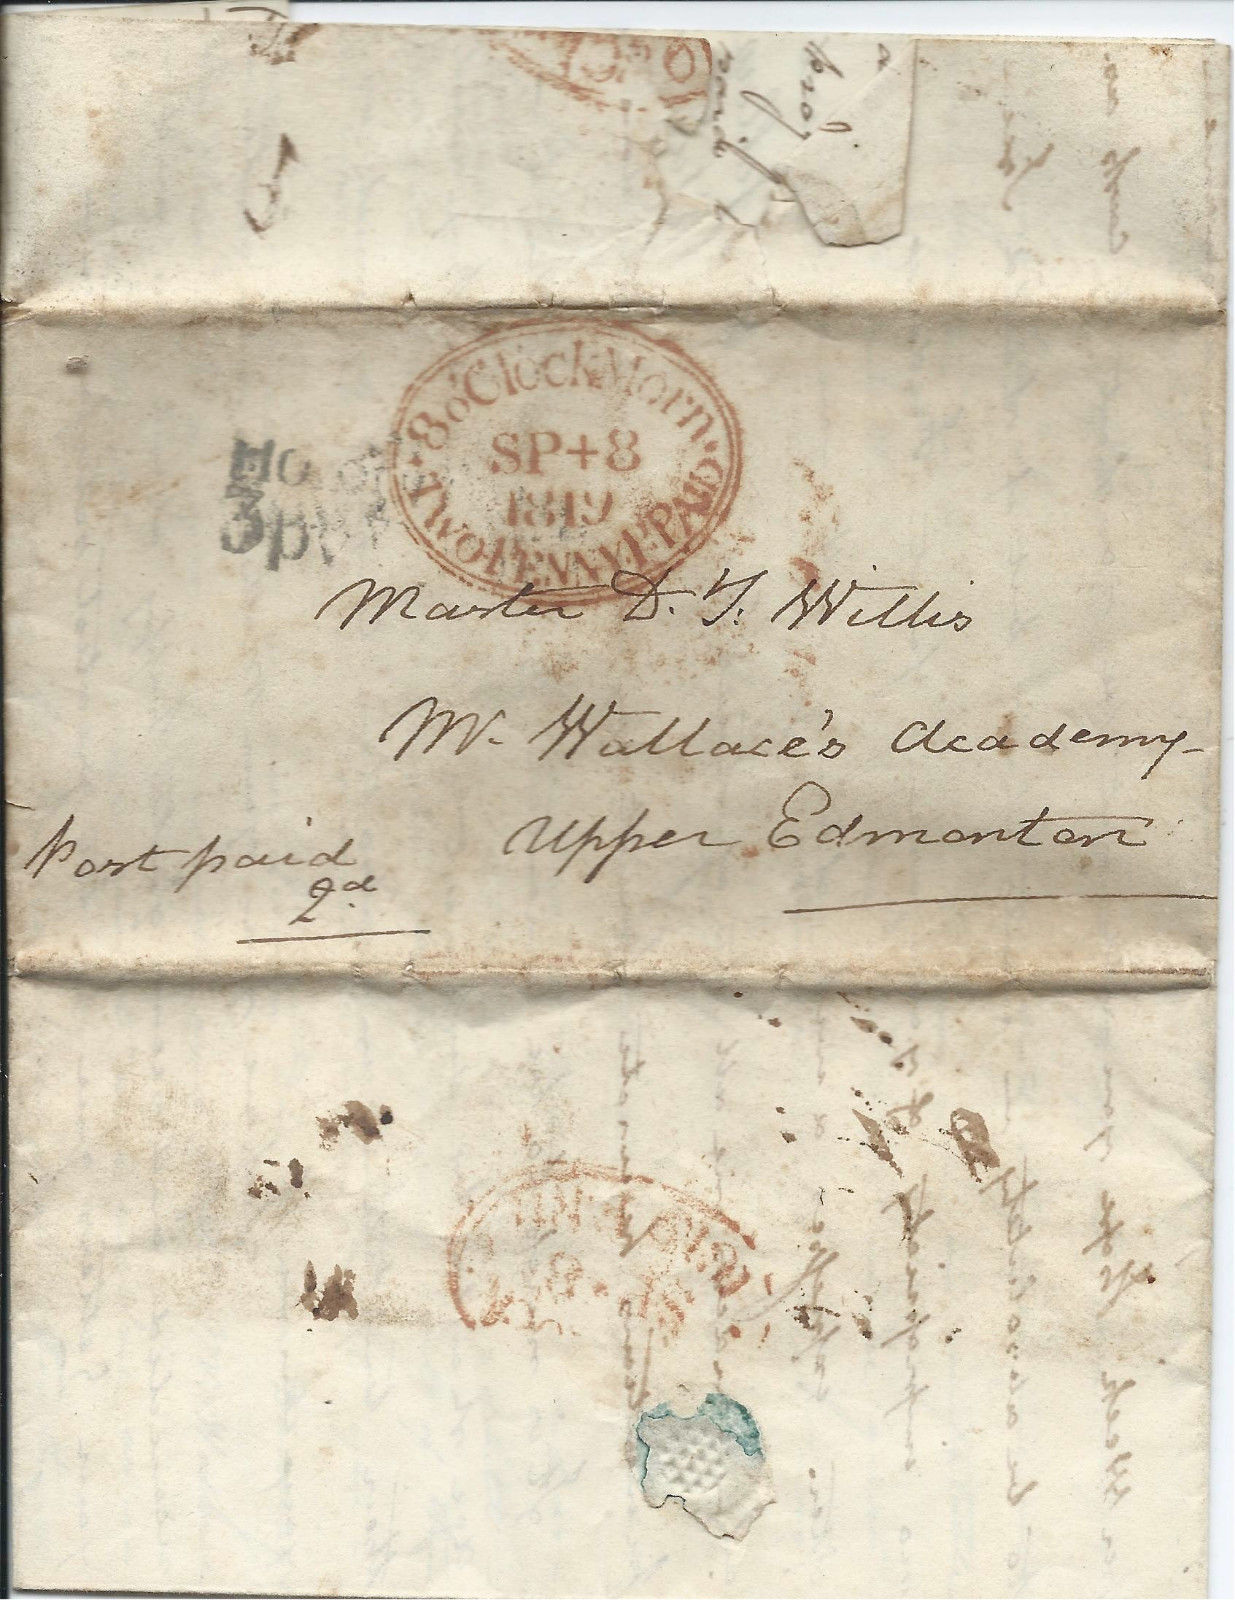 Address of the letter